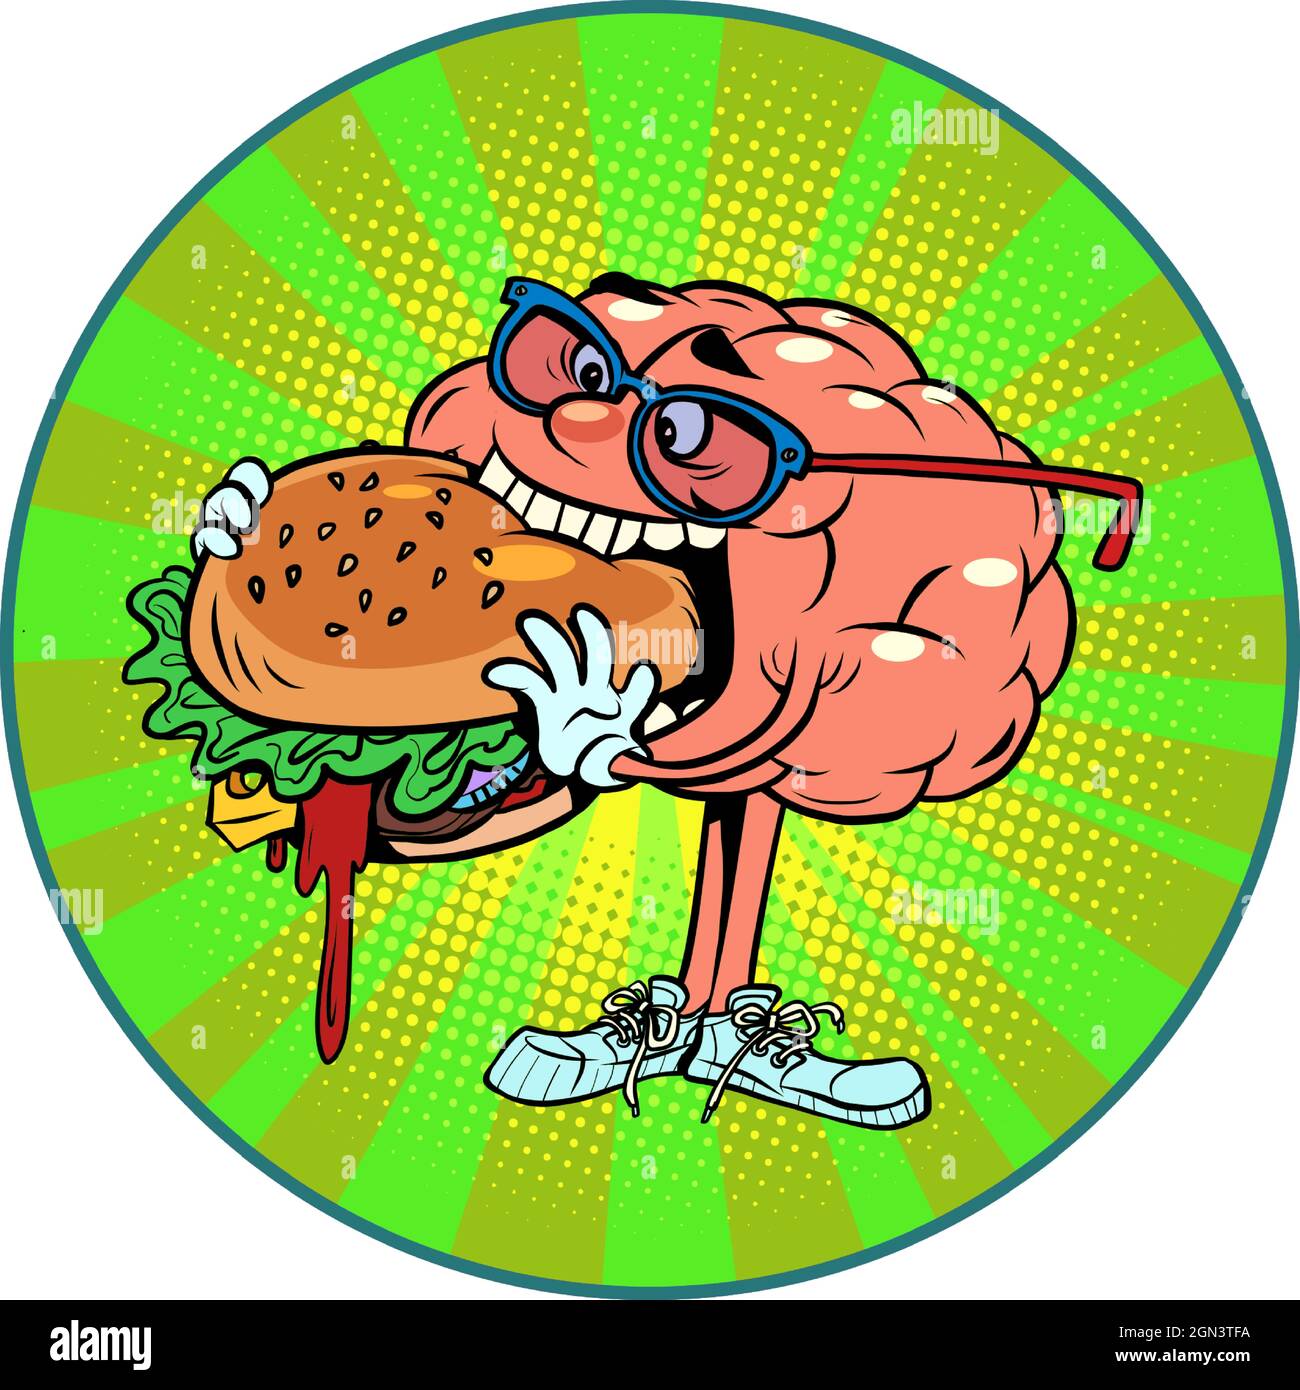 eat delicious fast food burger human brain character, smart wise Stock Vector